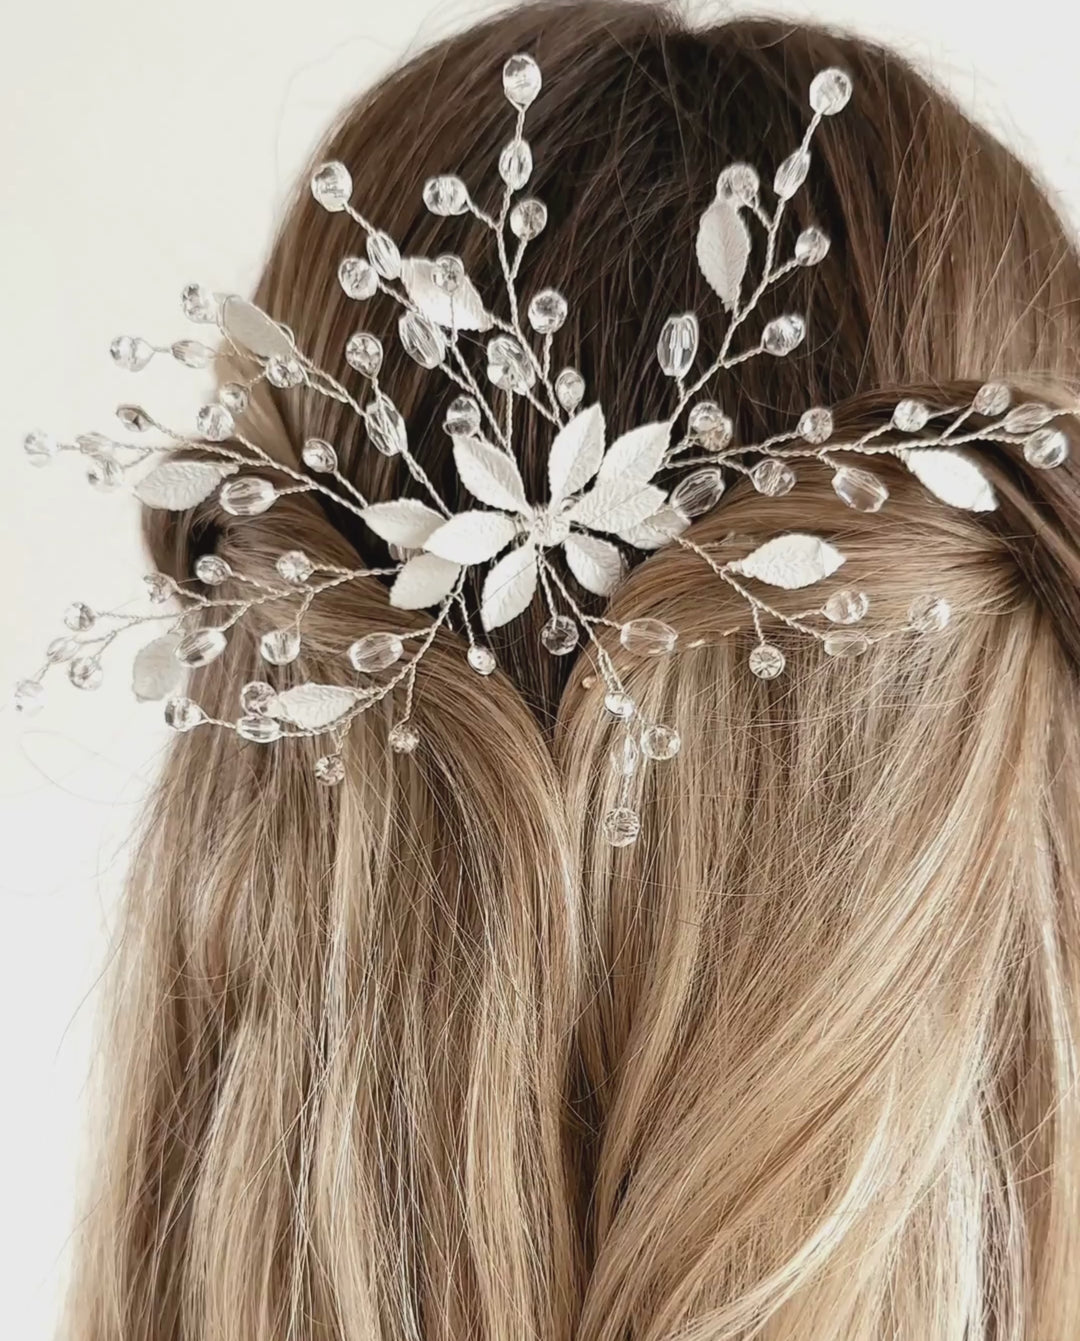 WHITE BRIDAL HEADDRESS COMB FLOWERS AND LEAVES